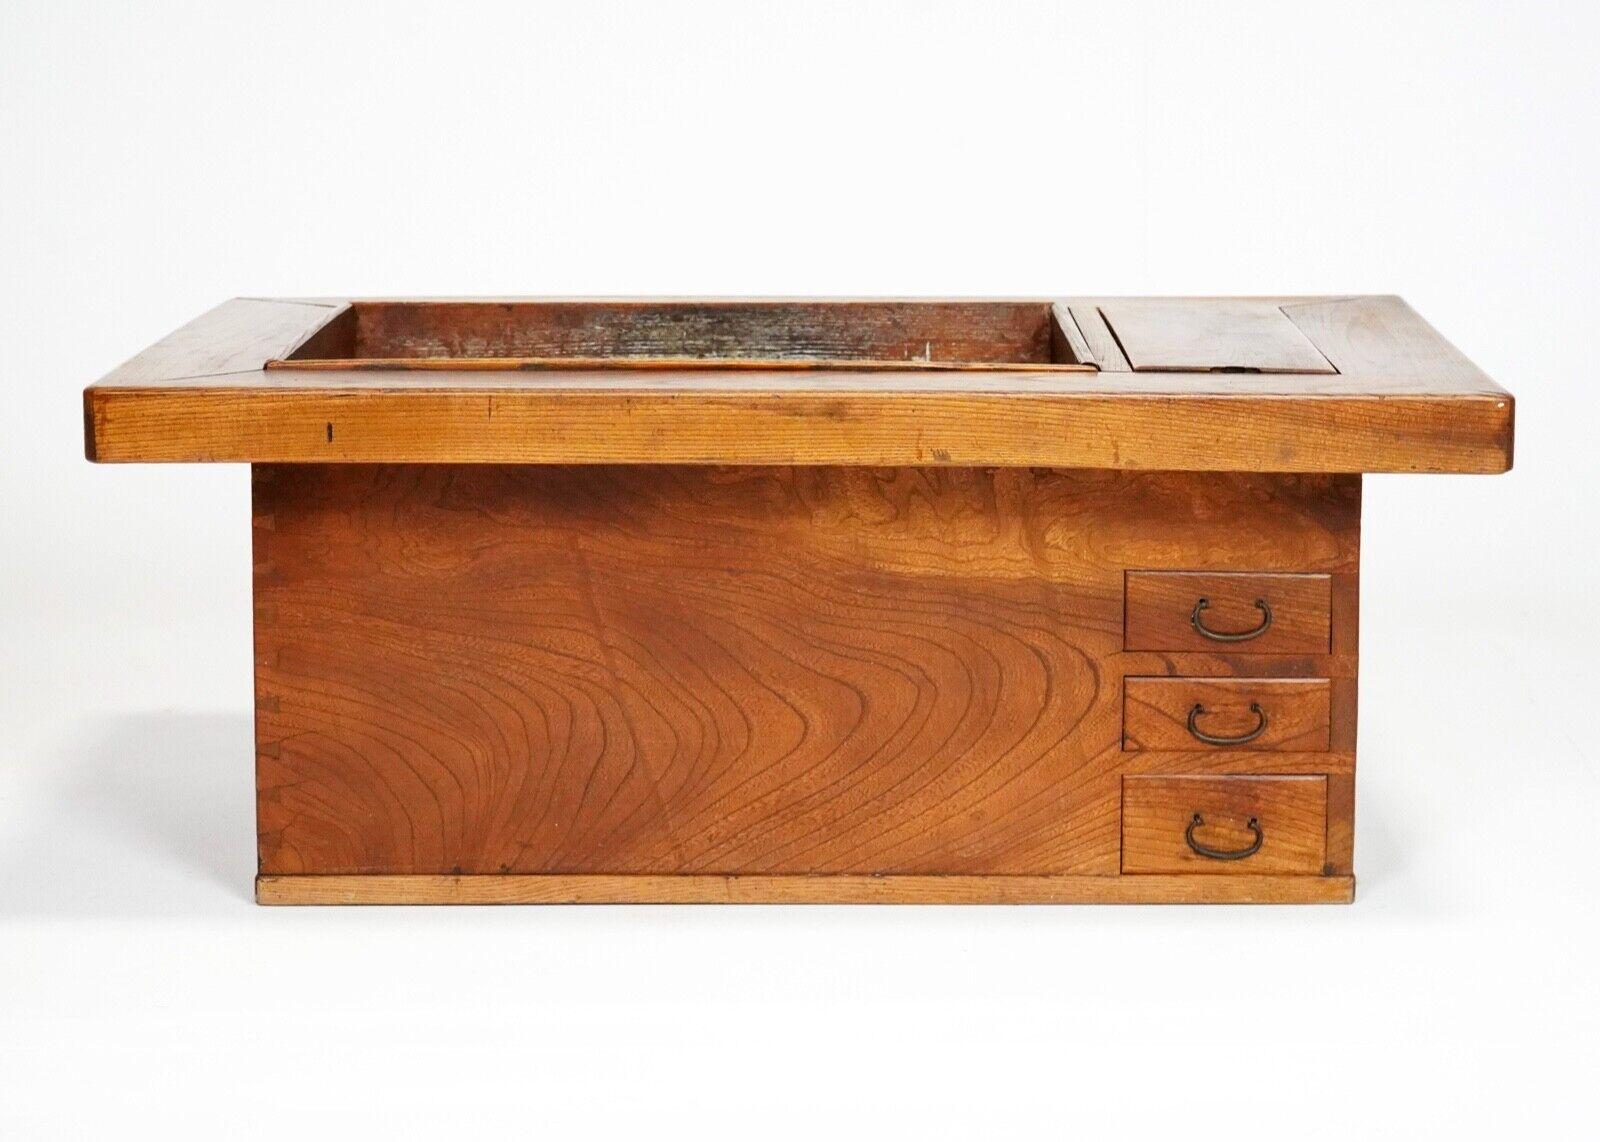 Antique Japanese hibachi from the Kyoto region, made from elm circa 1900.
Used originally to heat drinks and generally keep the room warm, now repurposed as a coffee table.
 It has a copper lined box where you'd originally have your coals, it'd be